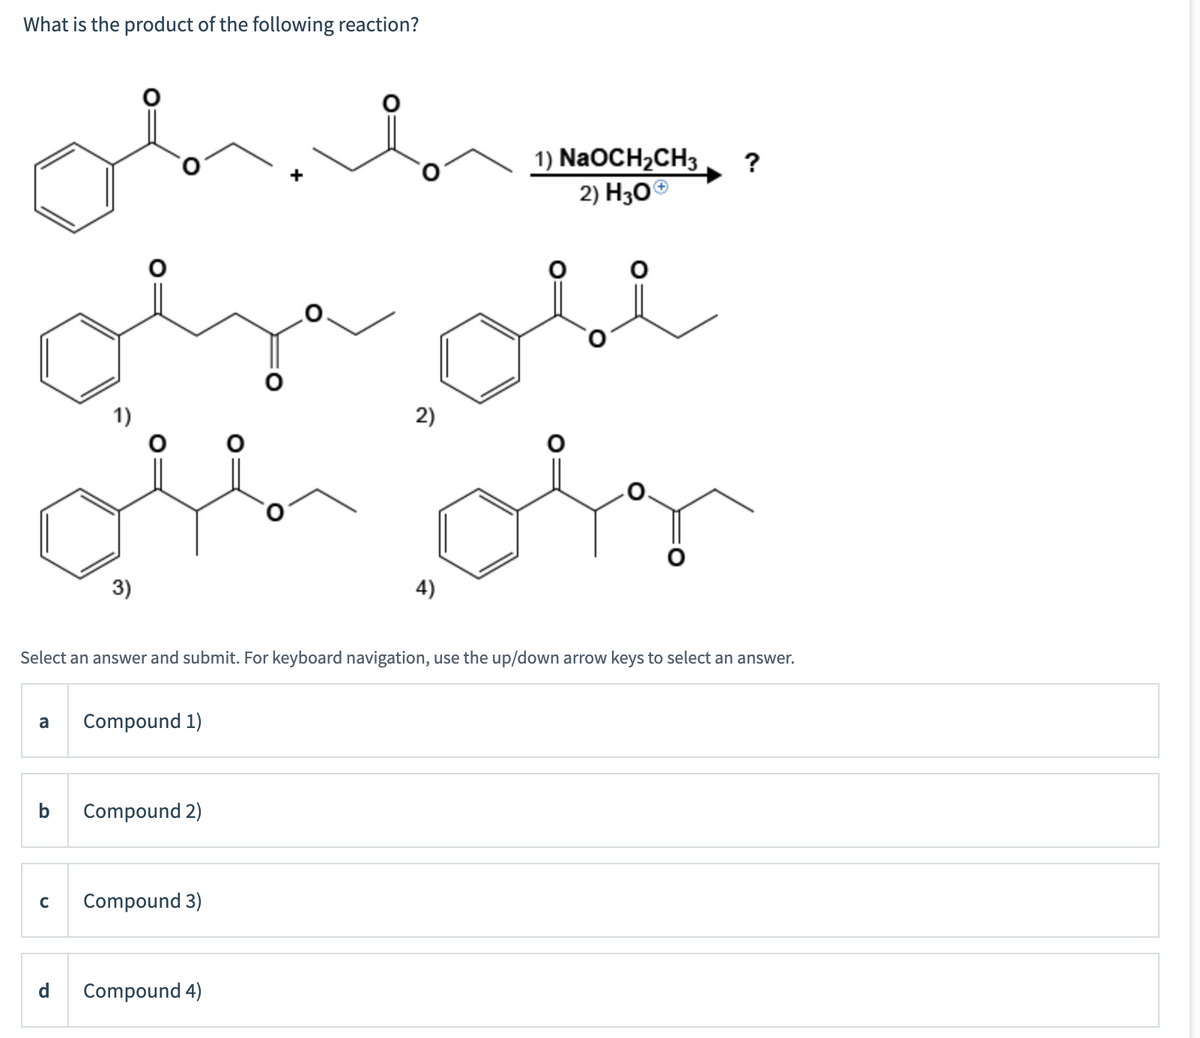 What is the product of the following reaction?
1) NaOCH2CH3
2) H30®
?
1)
2)
3)
4)
Select an answer and submit. For keyboard navigation, use the up/down arrow keys to select an answer.
a
Compound 1)
b
Compound 2)
Compound 3)
d
Compound 4)
